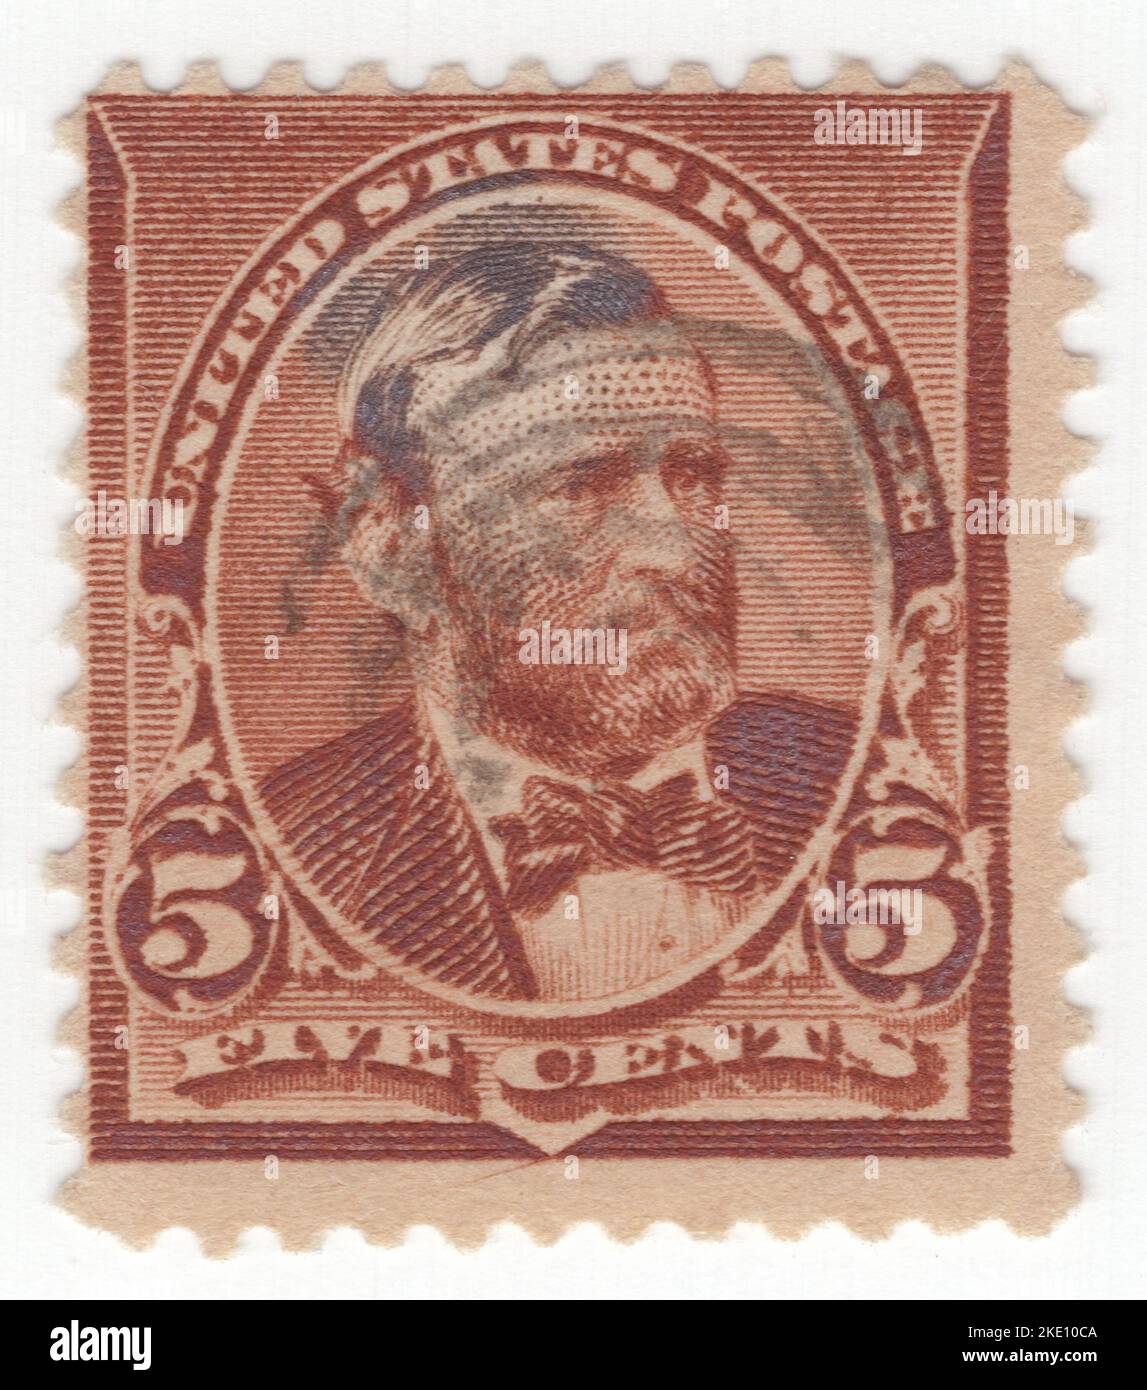 USA - 1890: An 5 cents chocolate postage stamp depicting portrait of Ulysses S. Grant (born Hiram Ulysses Grant), American military officer and politician who served as the 18th president of the United States from 1869 to 1877. As Commanding General, he led the Union Army to victory in the American Civil War in 1865 and thereafter briefly served as Secretary of War. Later, as president, Grant was an effective civil rights executive who signed the bill that created the Justice Department and worked with Radical Republicans to protect African Americans during Reconstruction Stock Photo